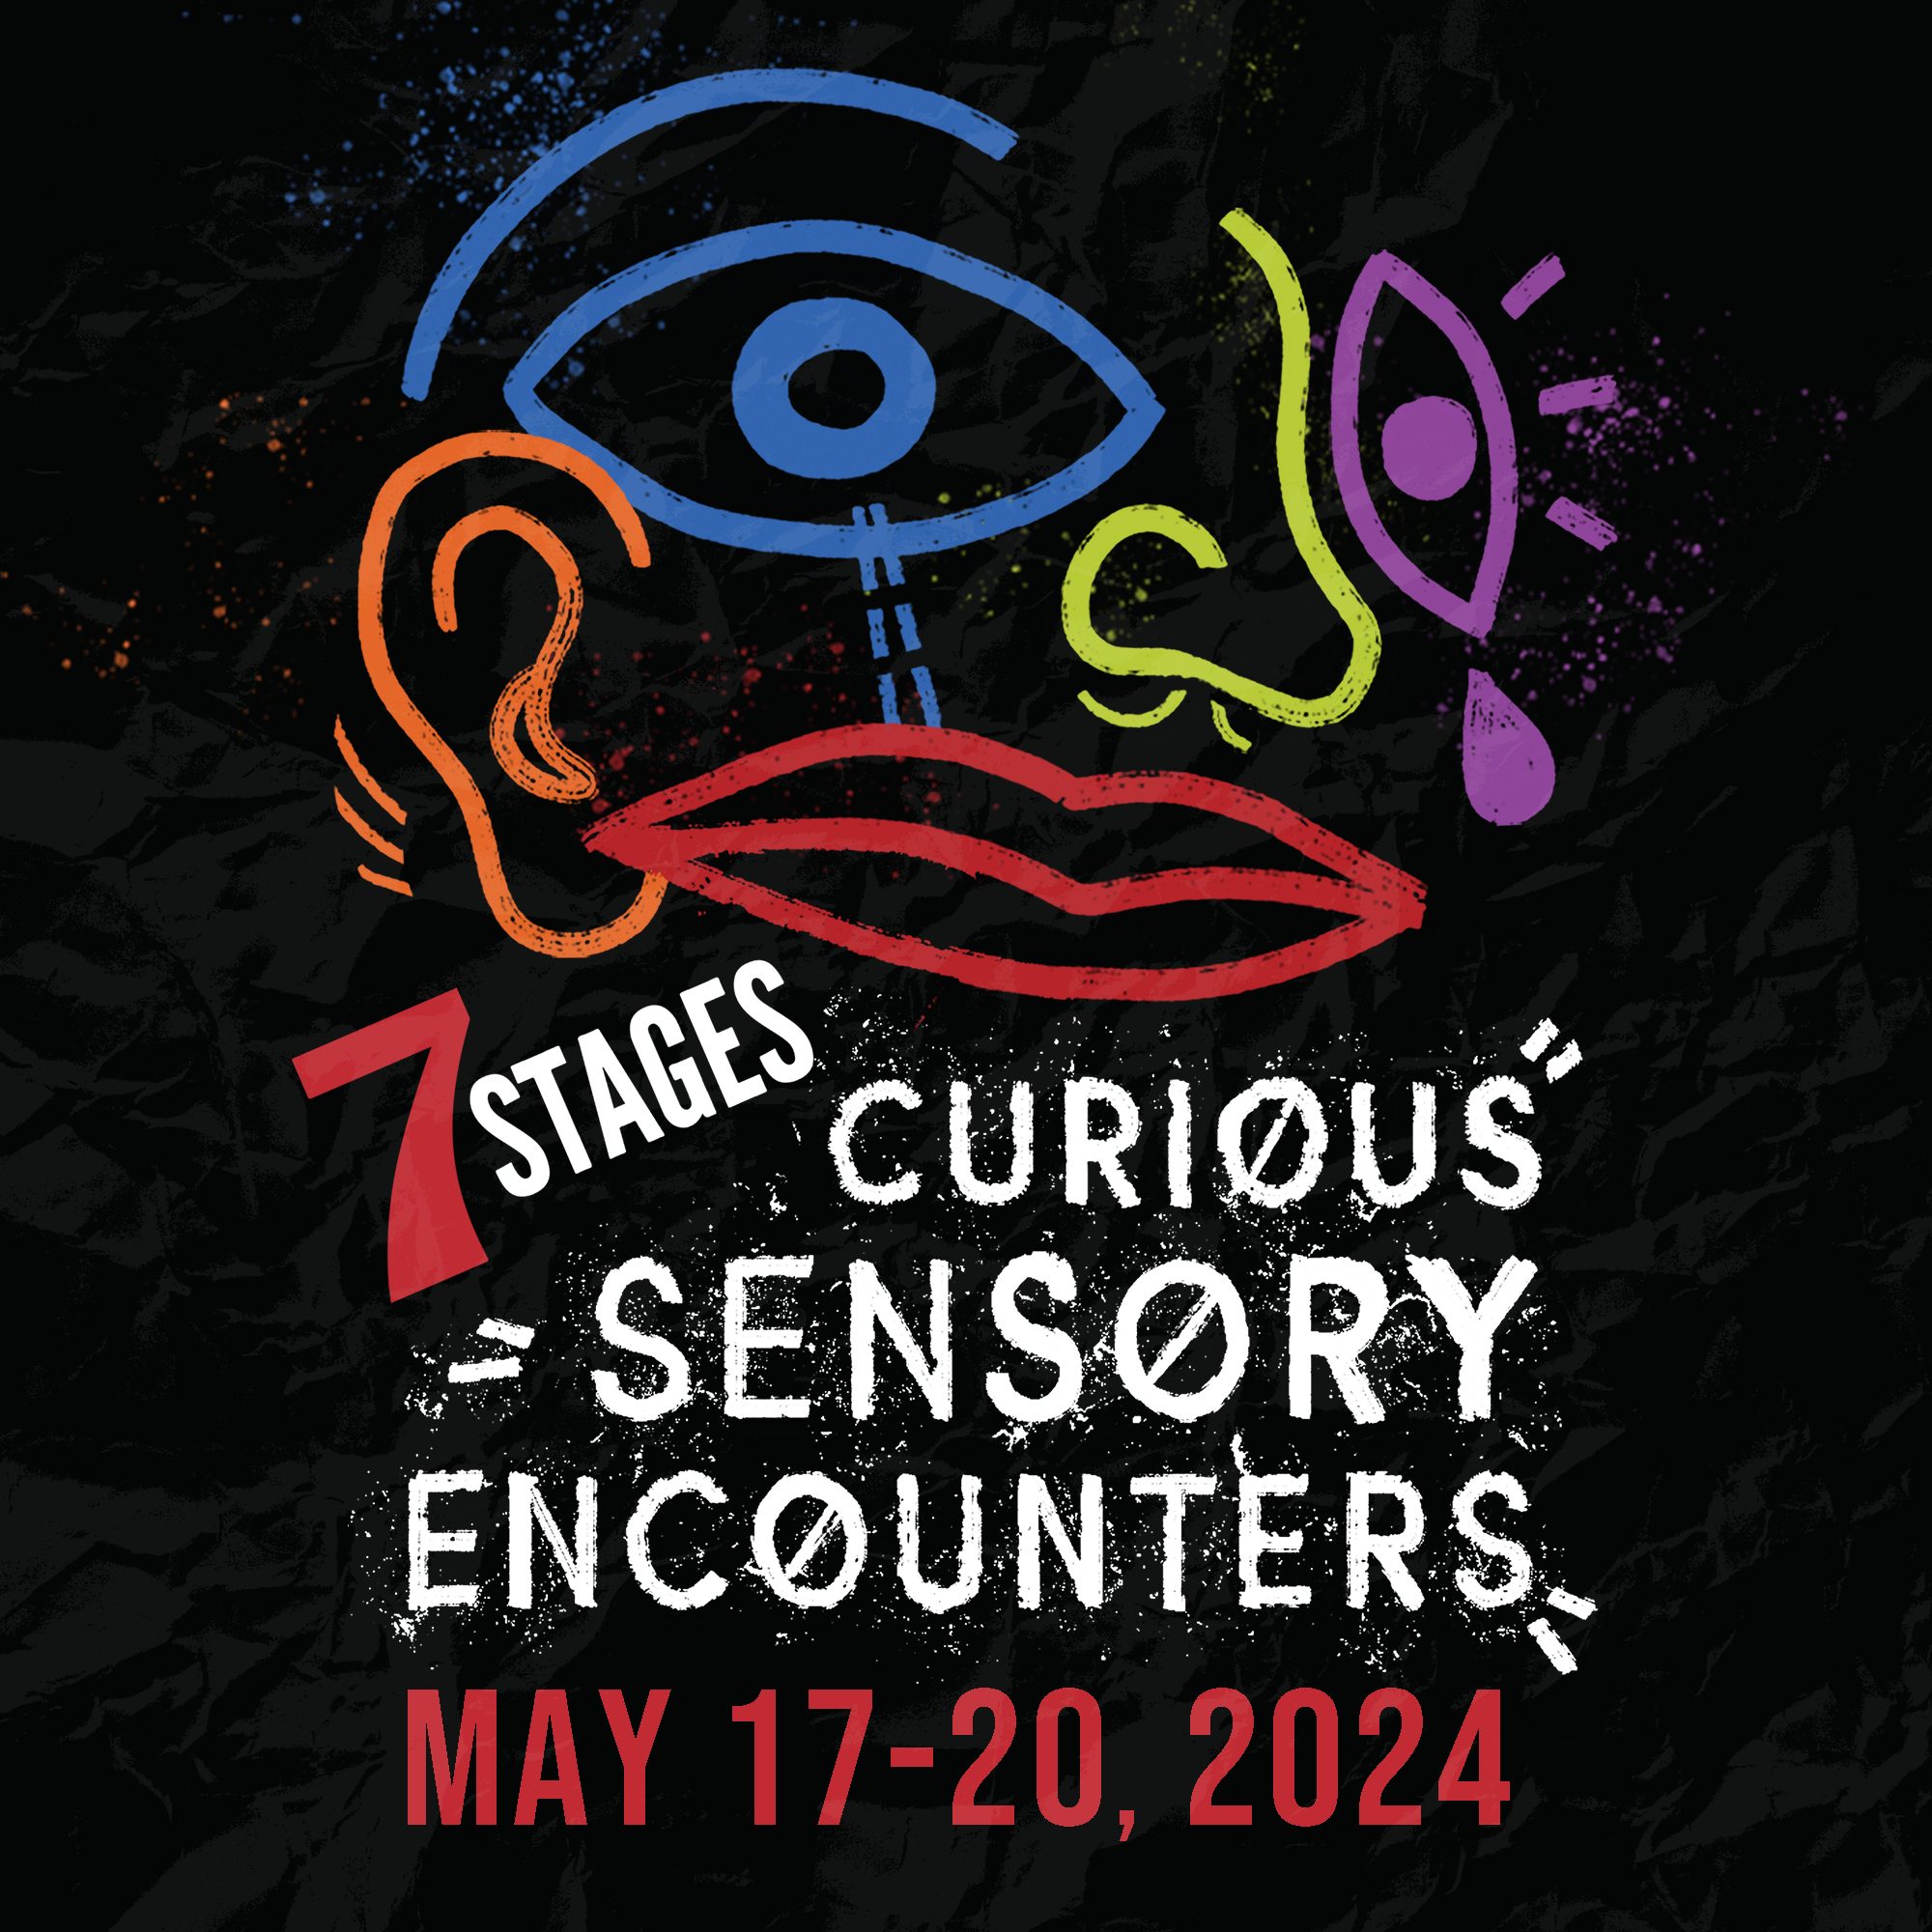 7 Stages Curious Sensory Encounters. May 17-20, 2024.